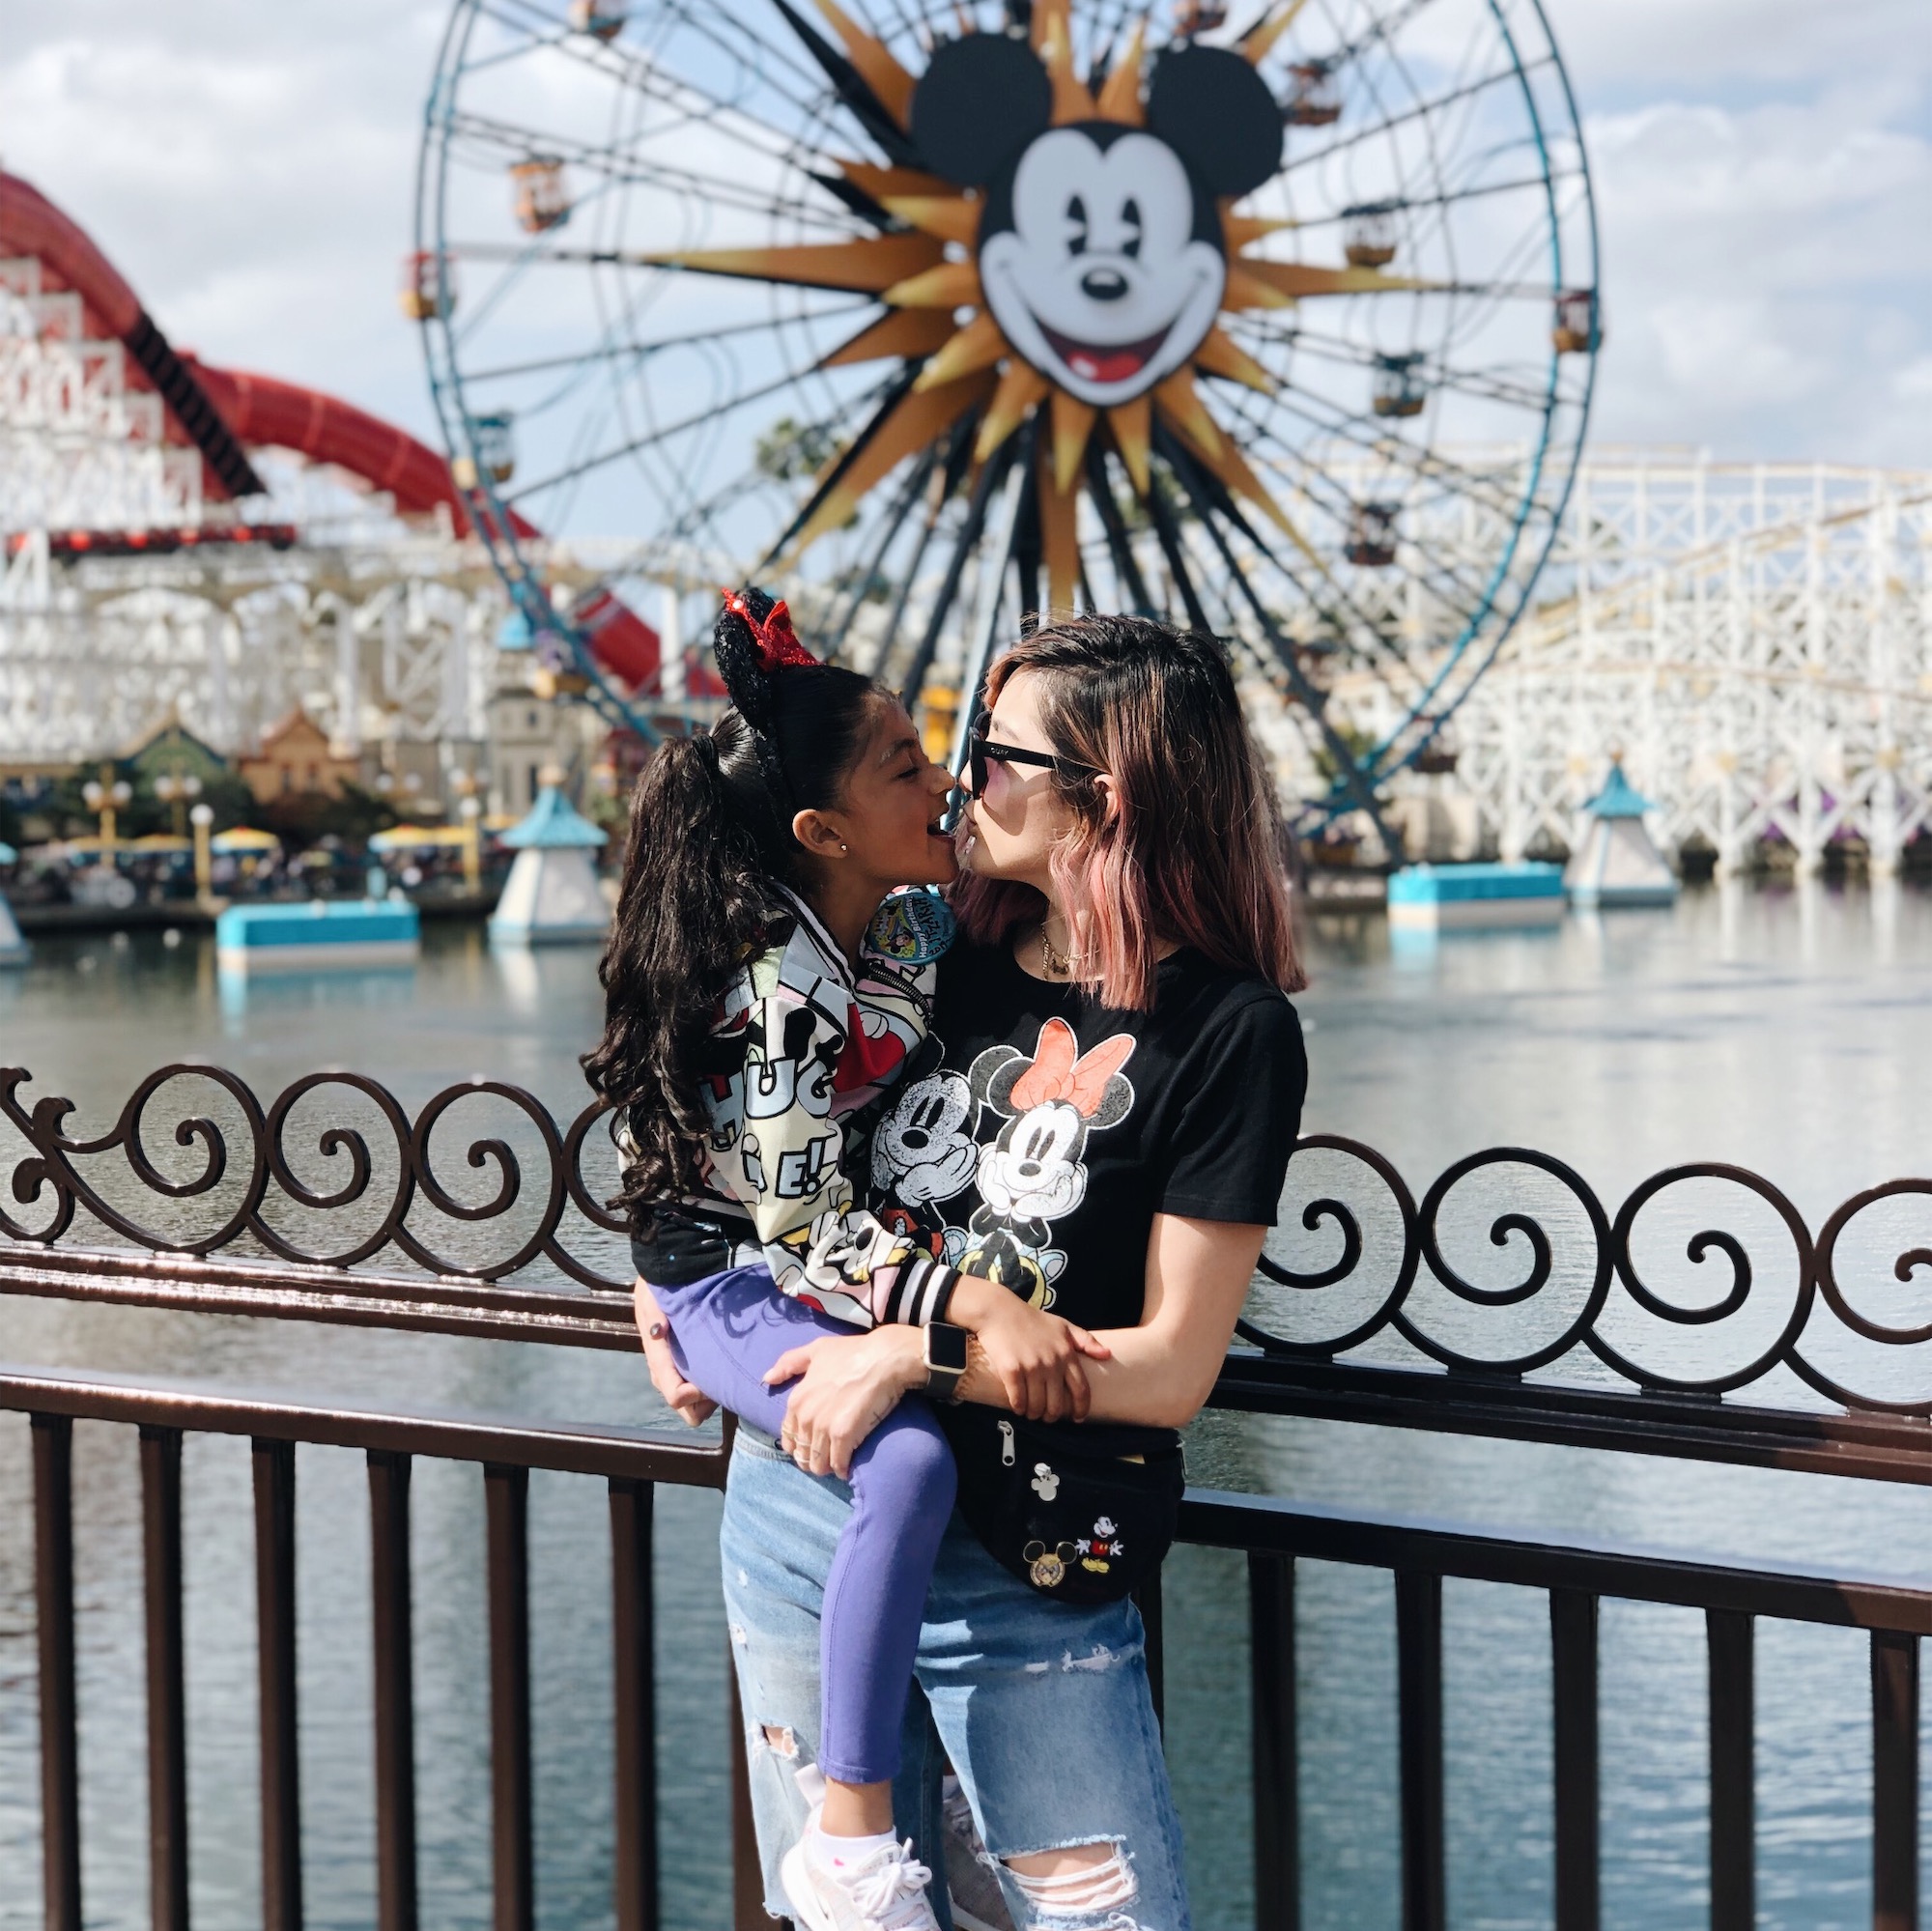 My Week at Disneyland (In Outfits) — EXCLUSIVELY EGO